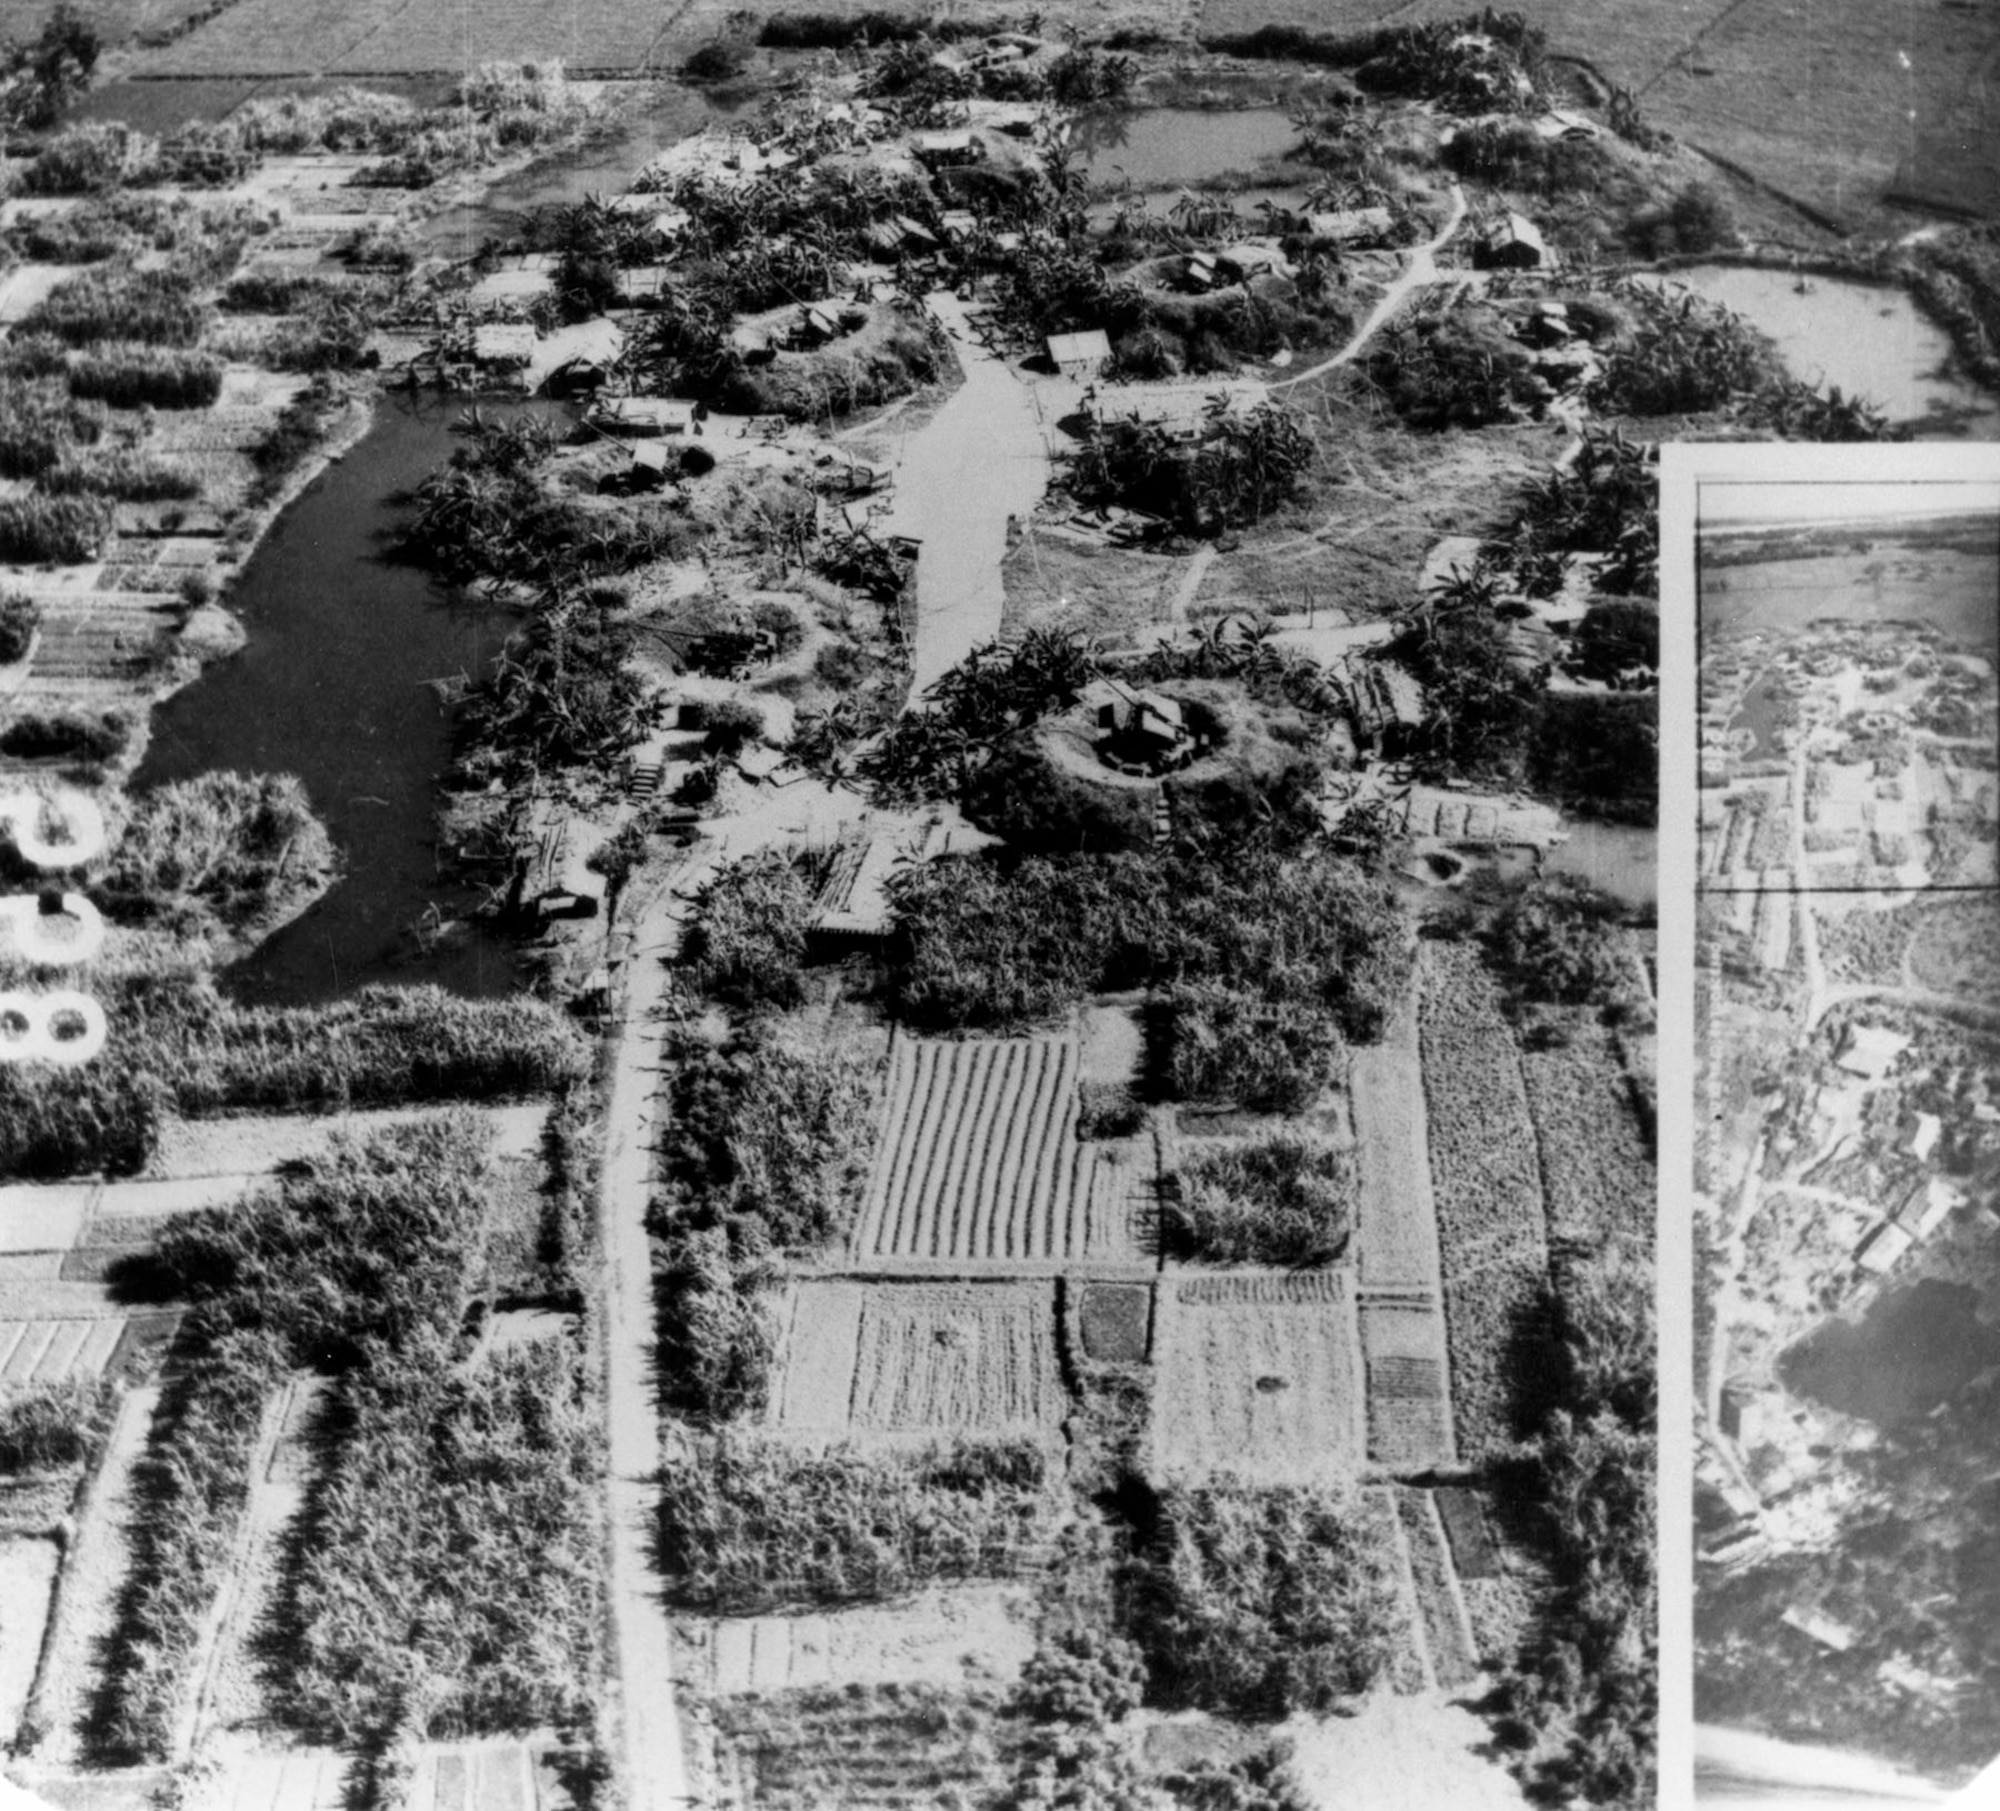 Photos of a communist anti-aircraft battery taken at low altitude by a Firebee. The seven gun positions are marked with arrows. The inset photo was shot with the Firebee’s panoramic camera. (U.S. Air Force photo)